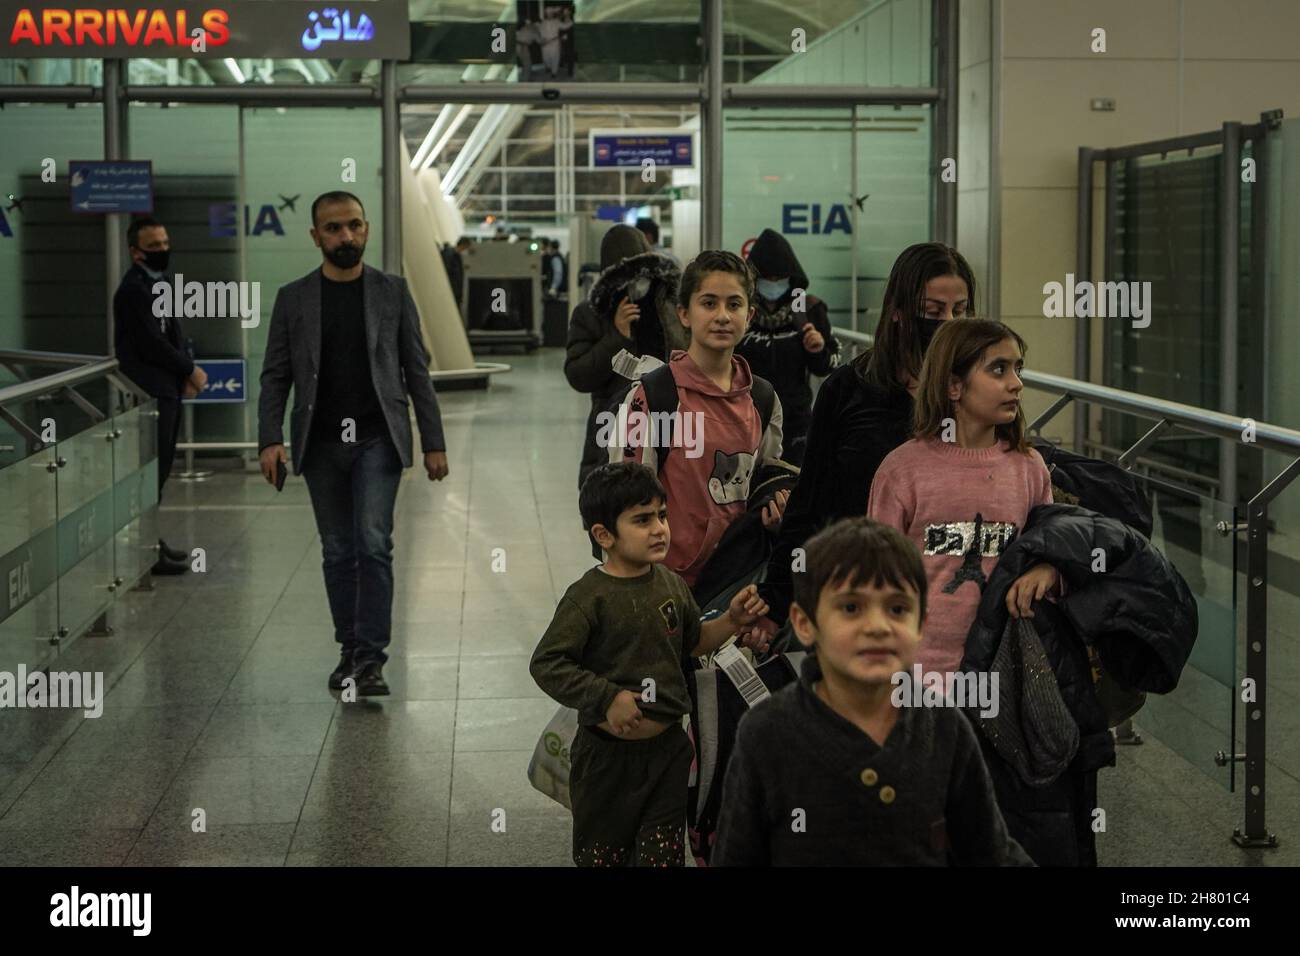 Erbil, Iraq. 26th Nov, 2021. Iraqi migrants, who were stranded for weeks along the Polish-Belarusian borders, walk through the arrivals terminal at Erbil International Airport, after arriving on board a repatriation flight sent by the Iraqi government. Credit: Ismael Adnan/dpa/Alamy Live News Stock Photo